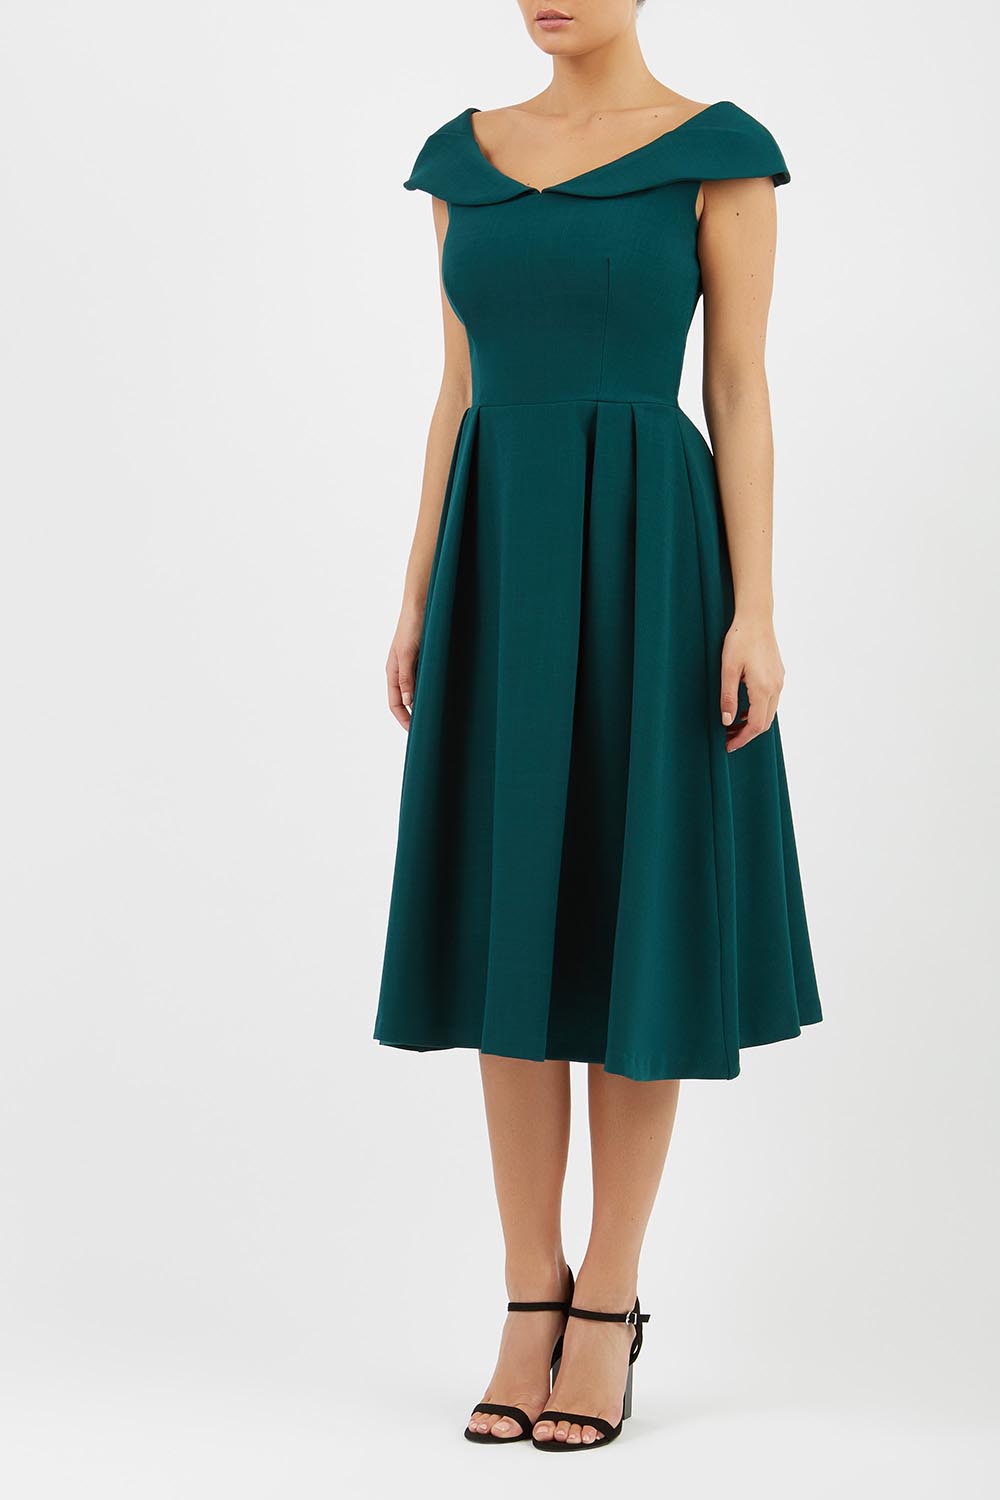 Model wearing the Diva Chesterton Sleeveless dress with oversized collar detail and swing pleated skirt in forest green front image